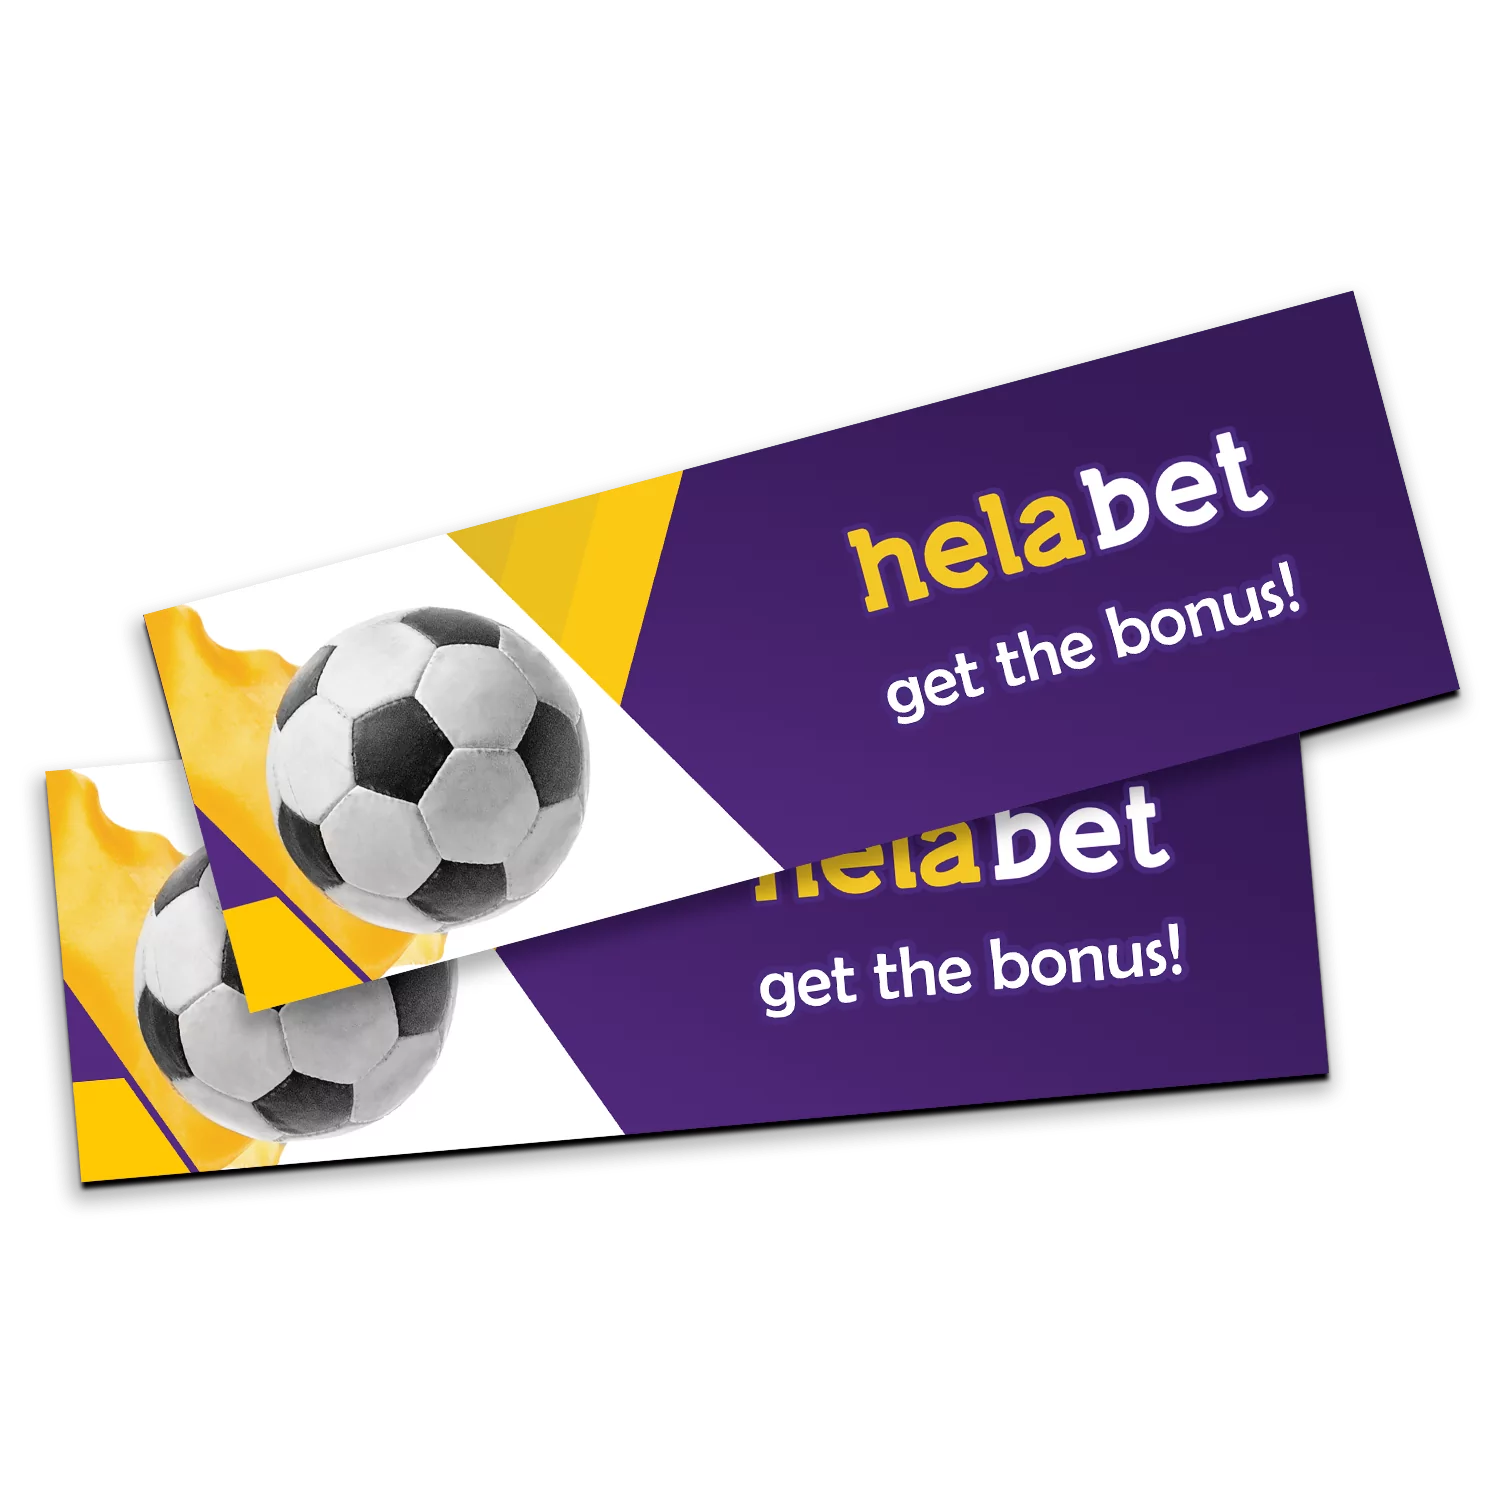 Learn how to get the welcome bonus or other from the Helabet bookmaker.